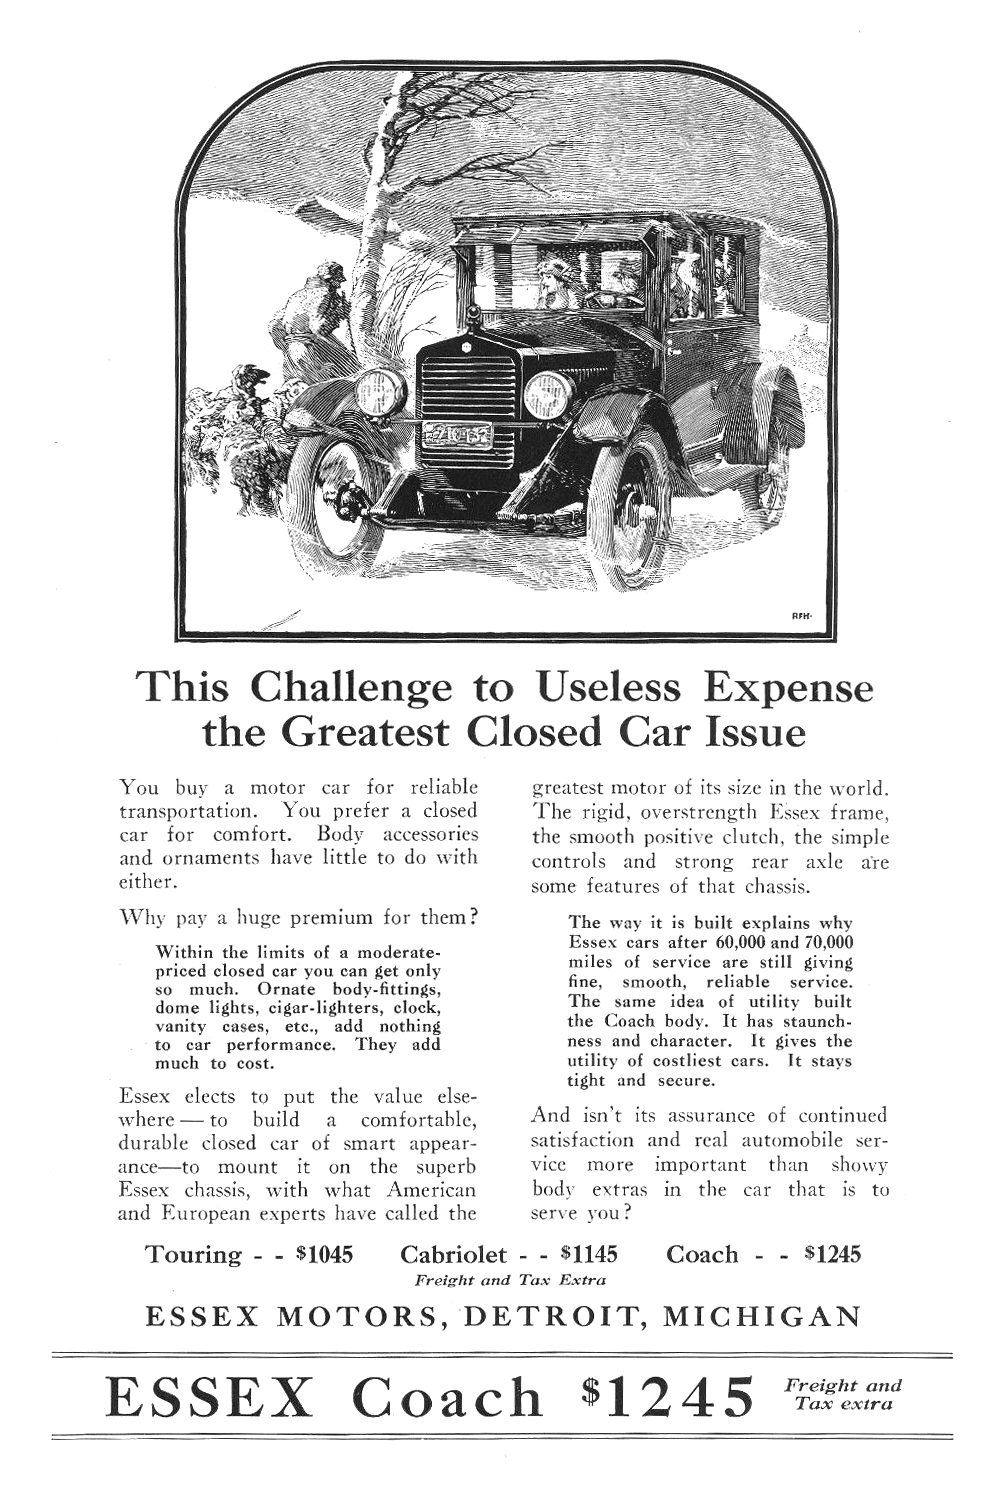 Essex Coach Ad (November, 1922): Illustrated by Roy Frederic Heinrich - This Challenge to Useless Expence the Greatest Closed Car Issue